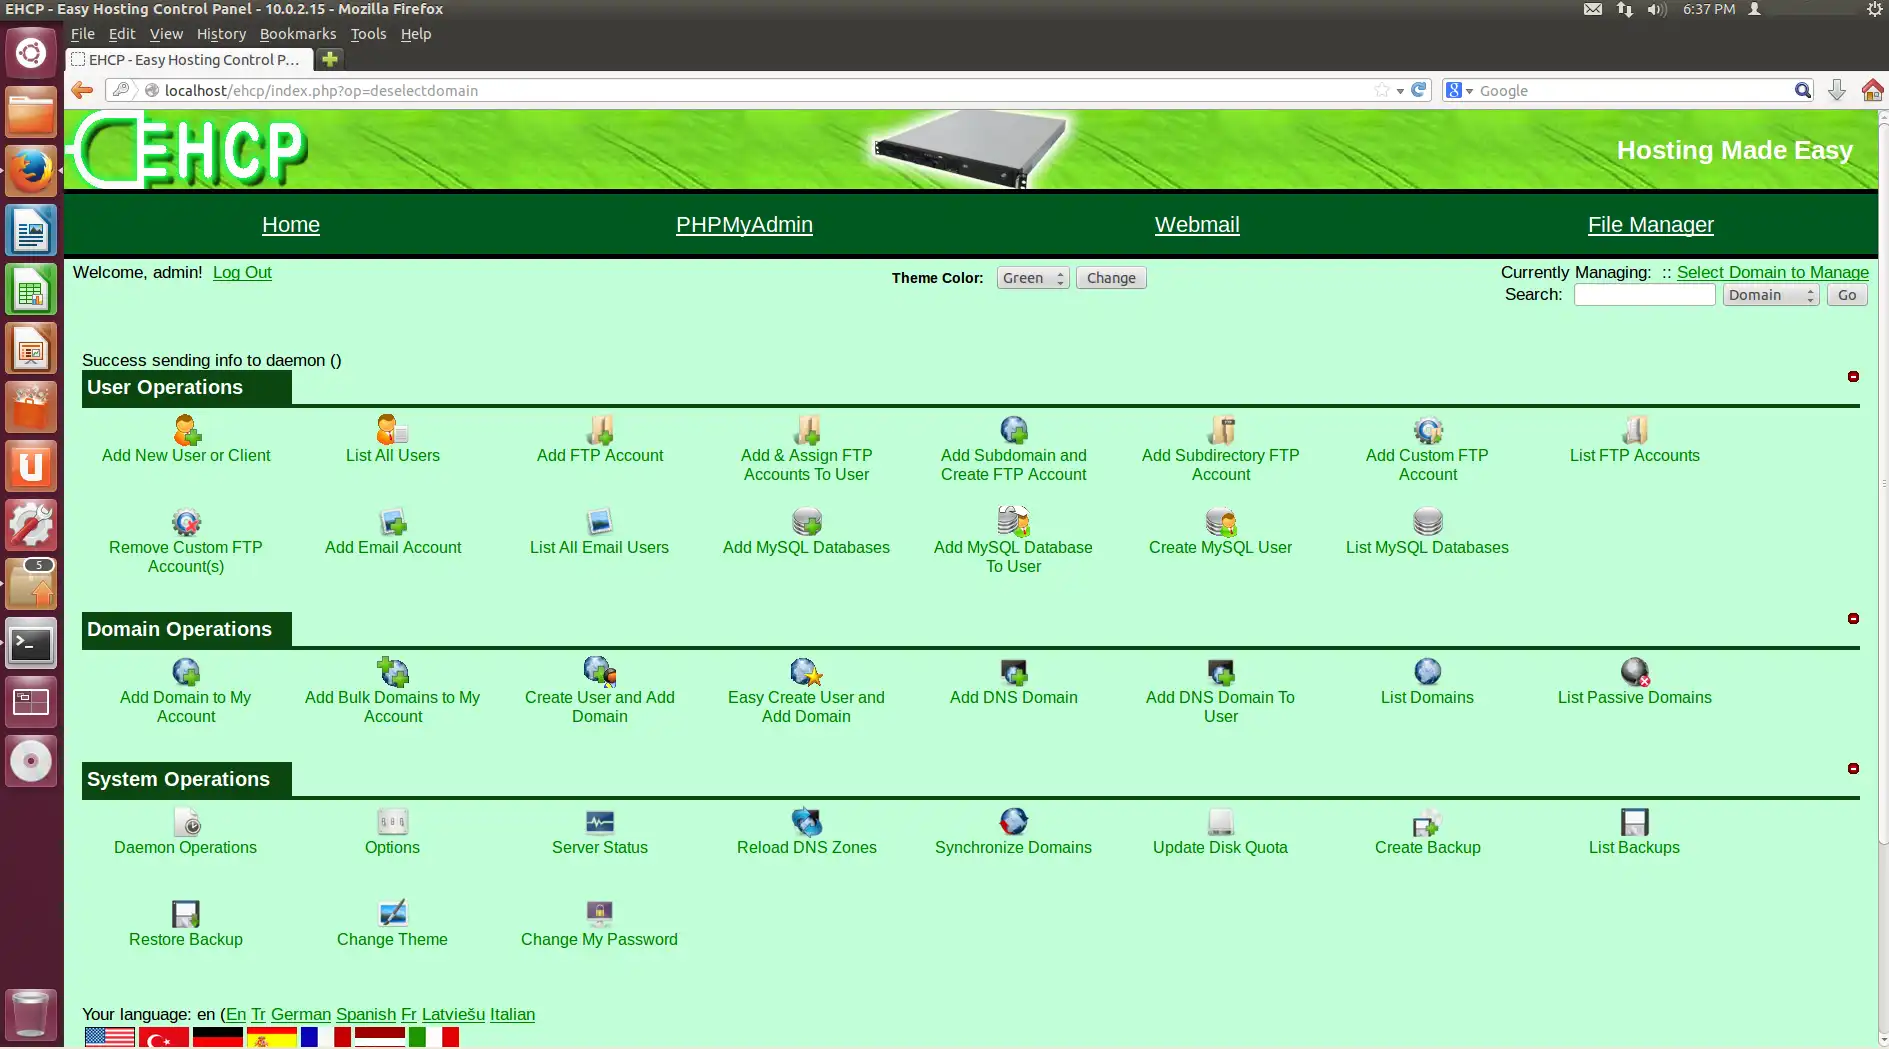 Download web tool or web app Easy Hosting Control Panel [FoRcE Ed]